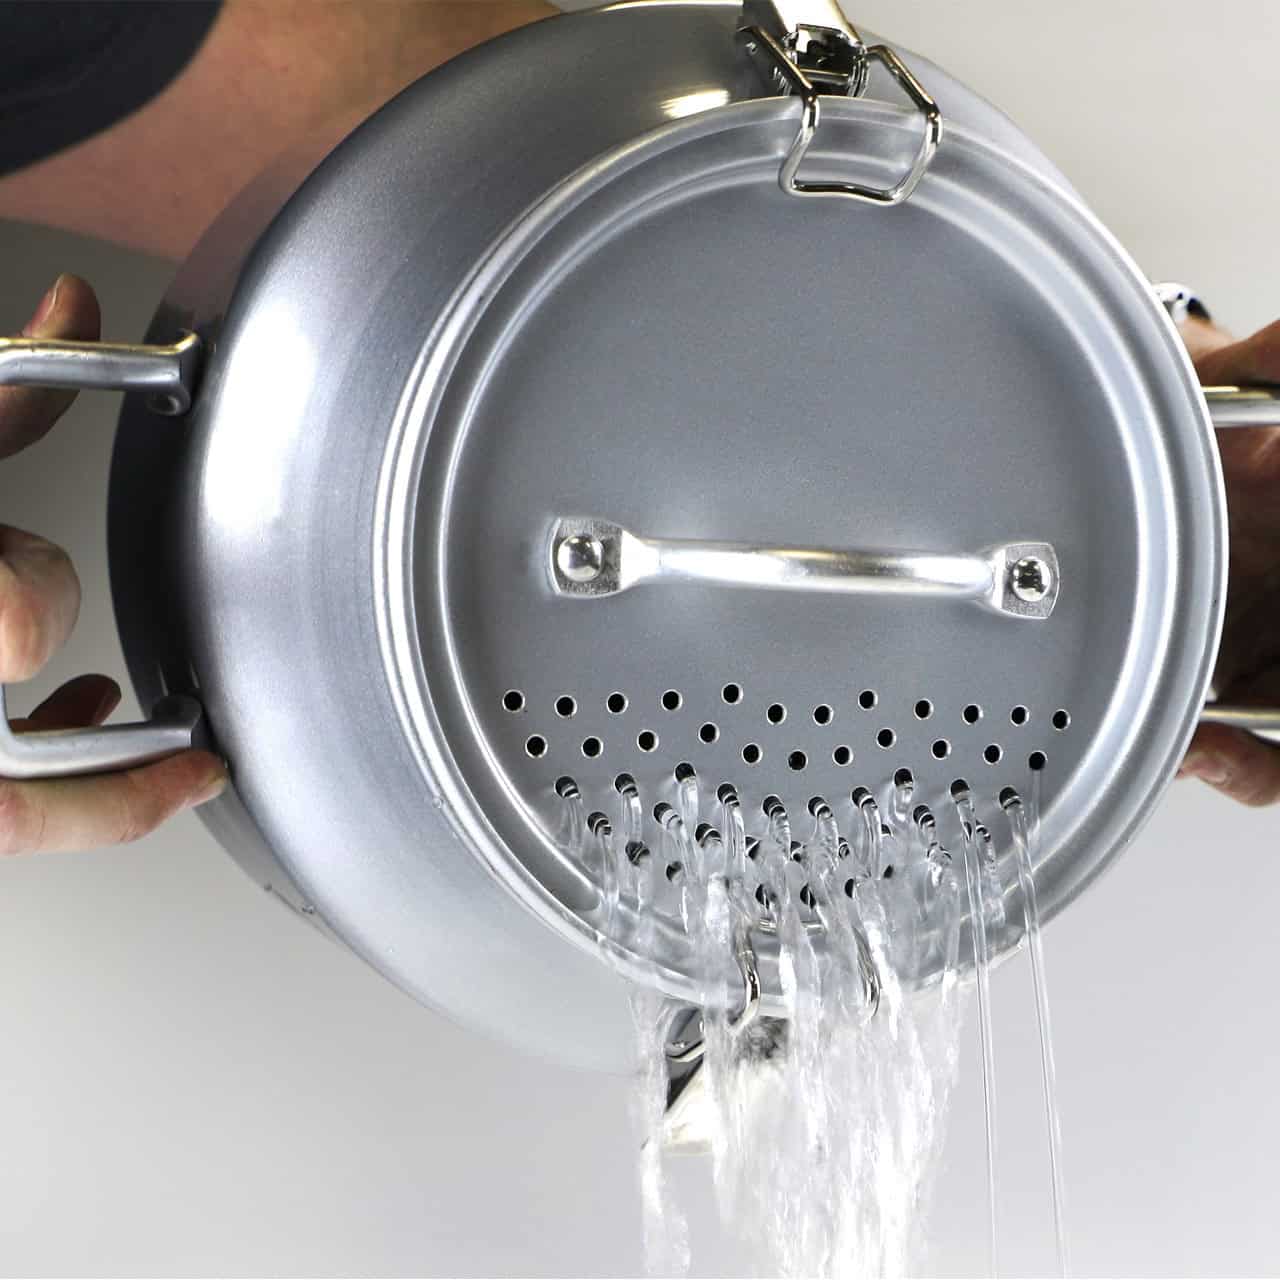 https://www.cancooker.com/wp-content/uploads/2020/10/products-Strainer_Lid_pouring_liquid__24054.1603290885.1280.1280.jpg